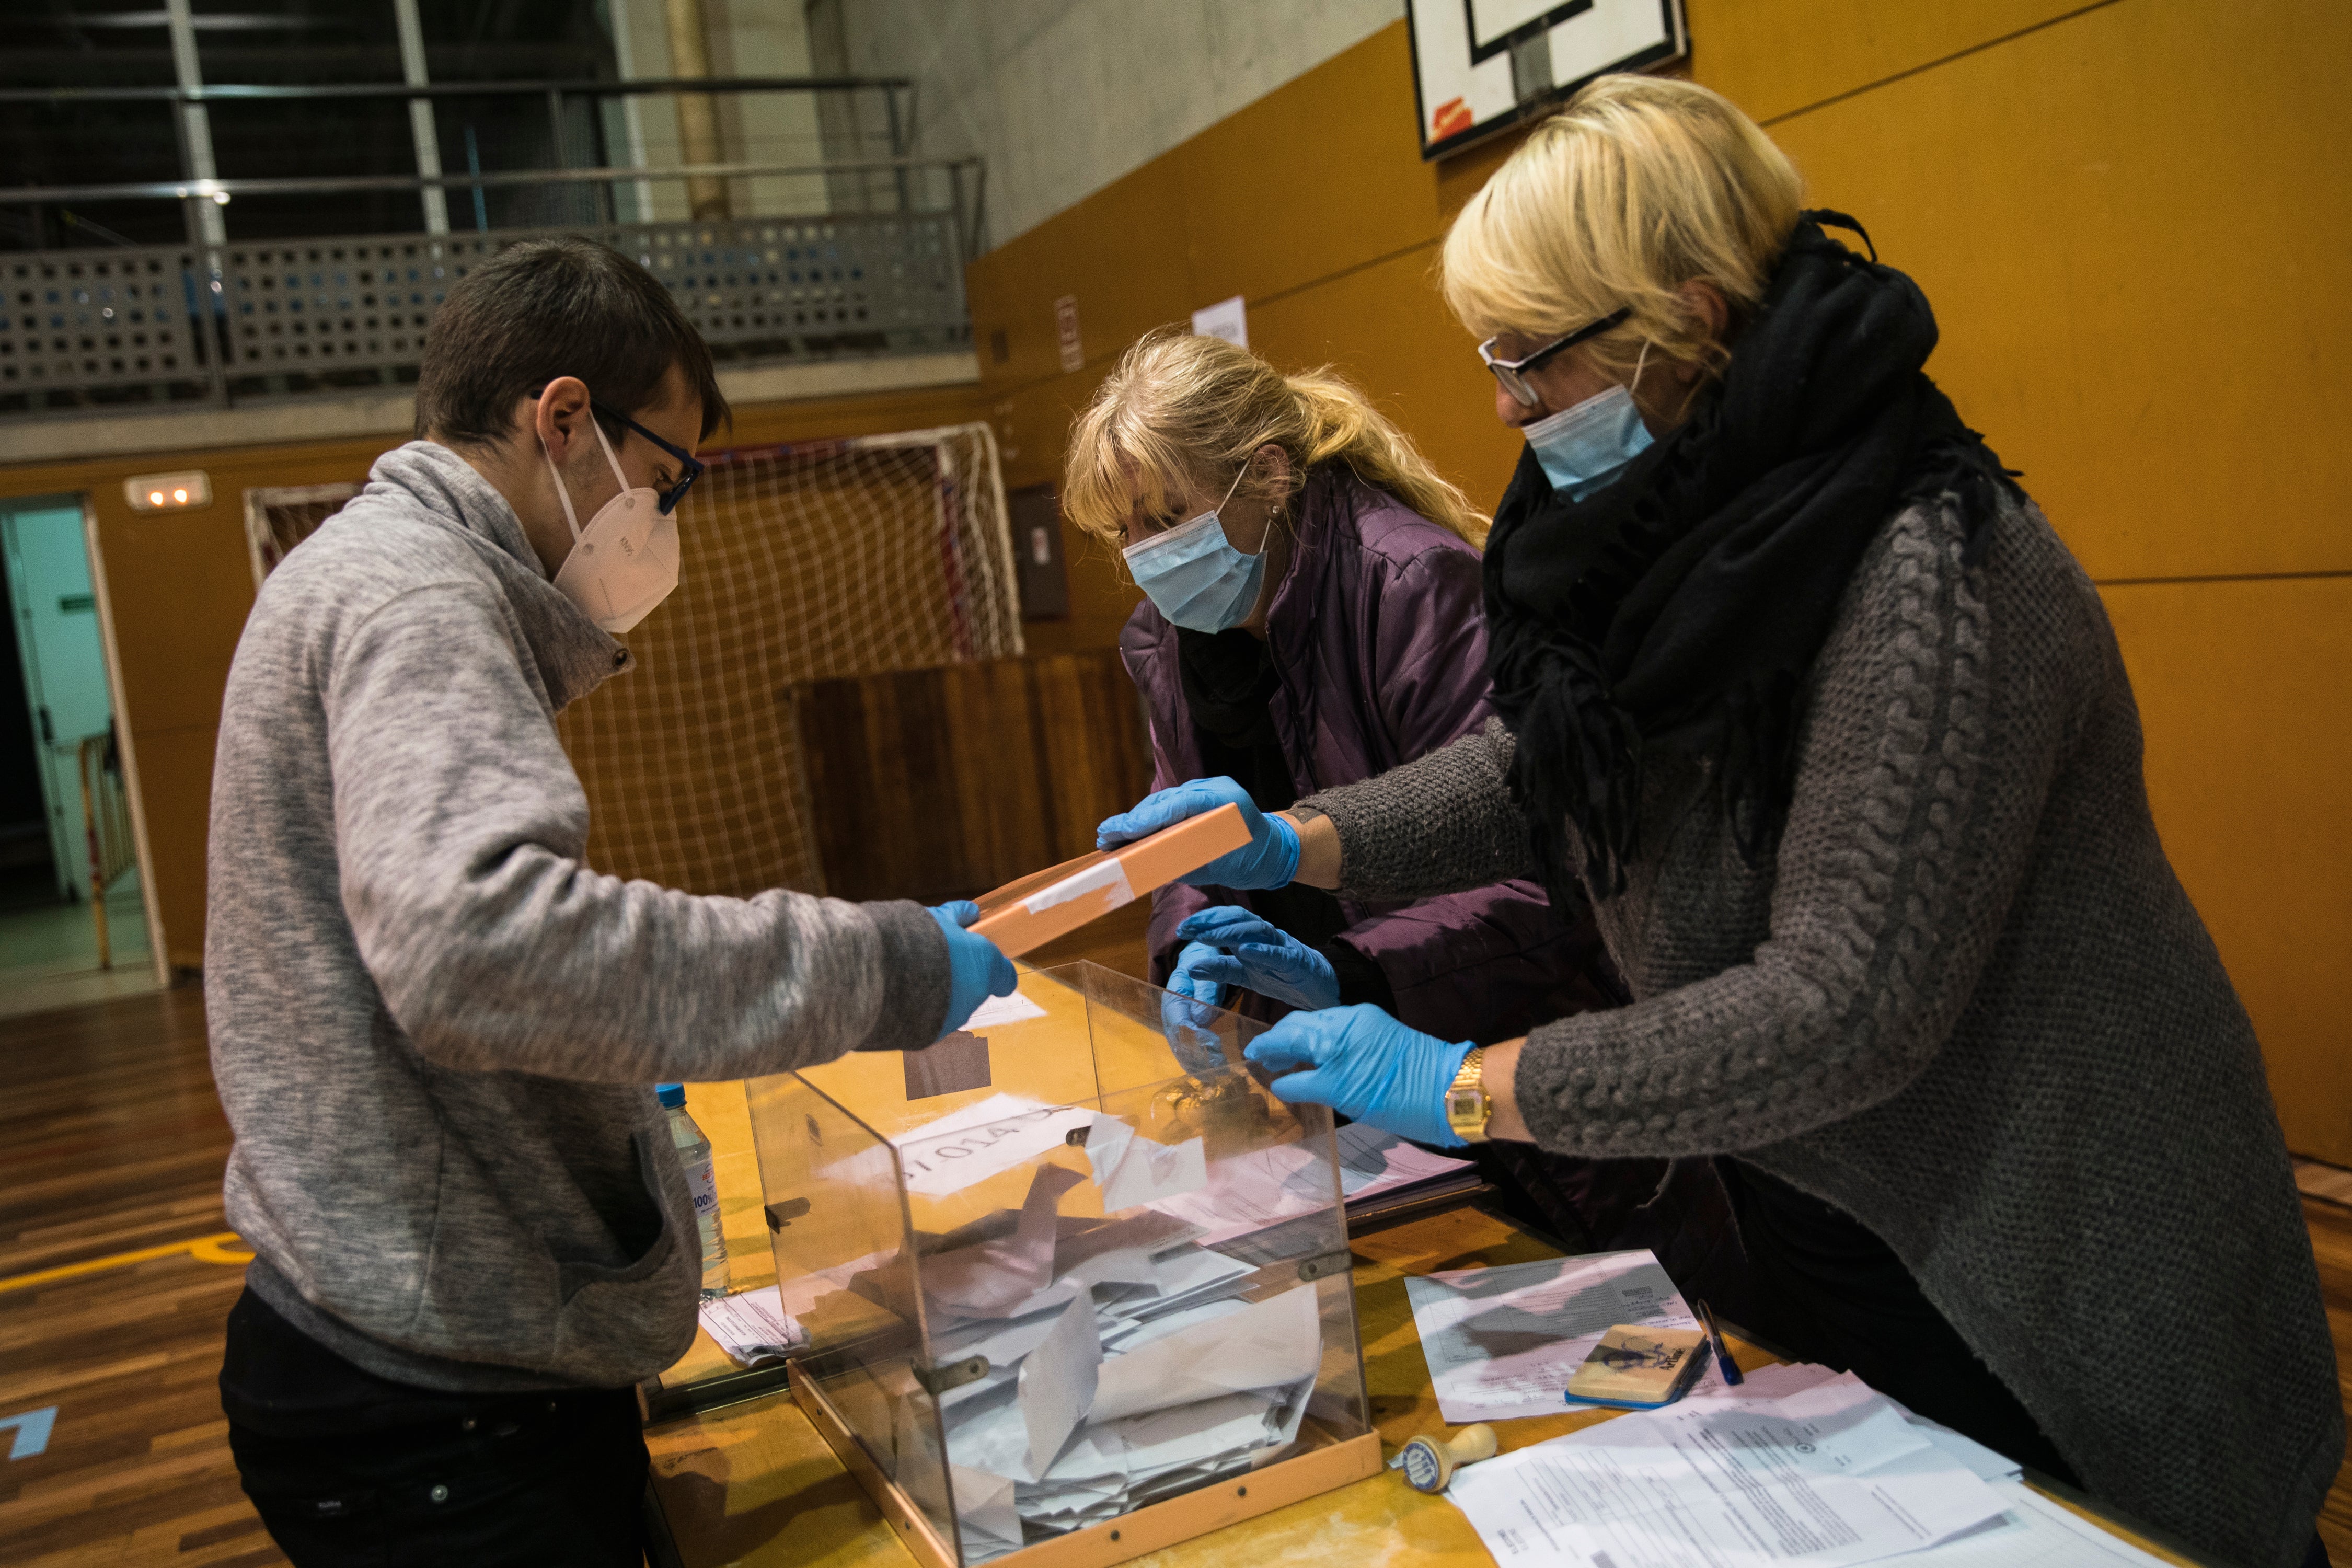 Barcelona’s Catalonia held regional elections last month against a backdrop of the Covid pandemic